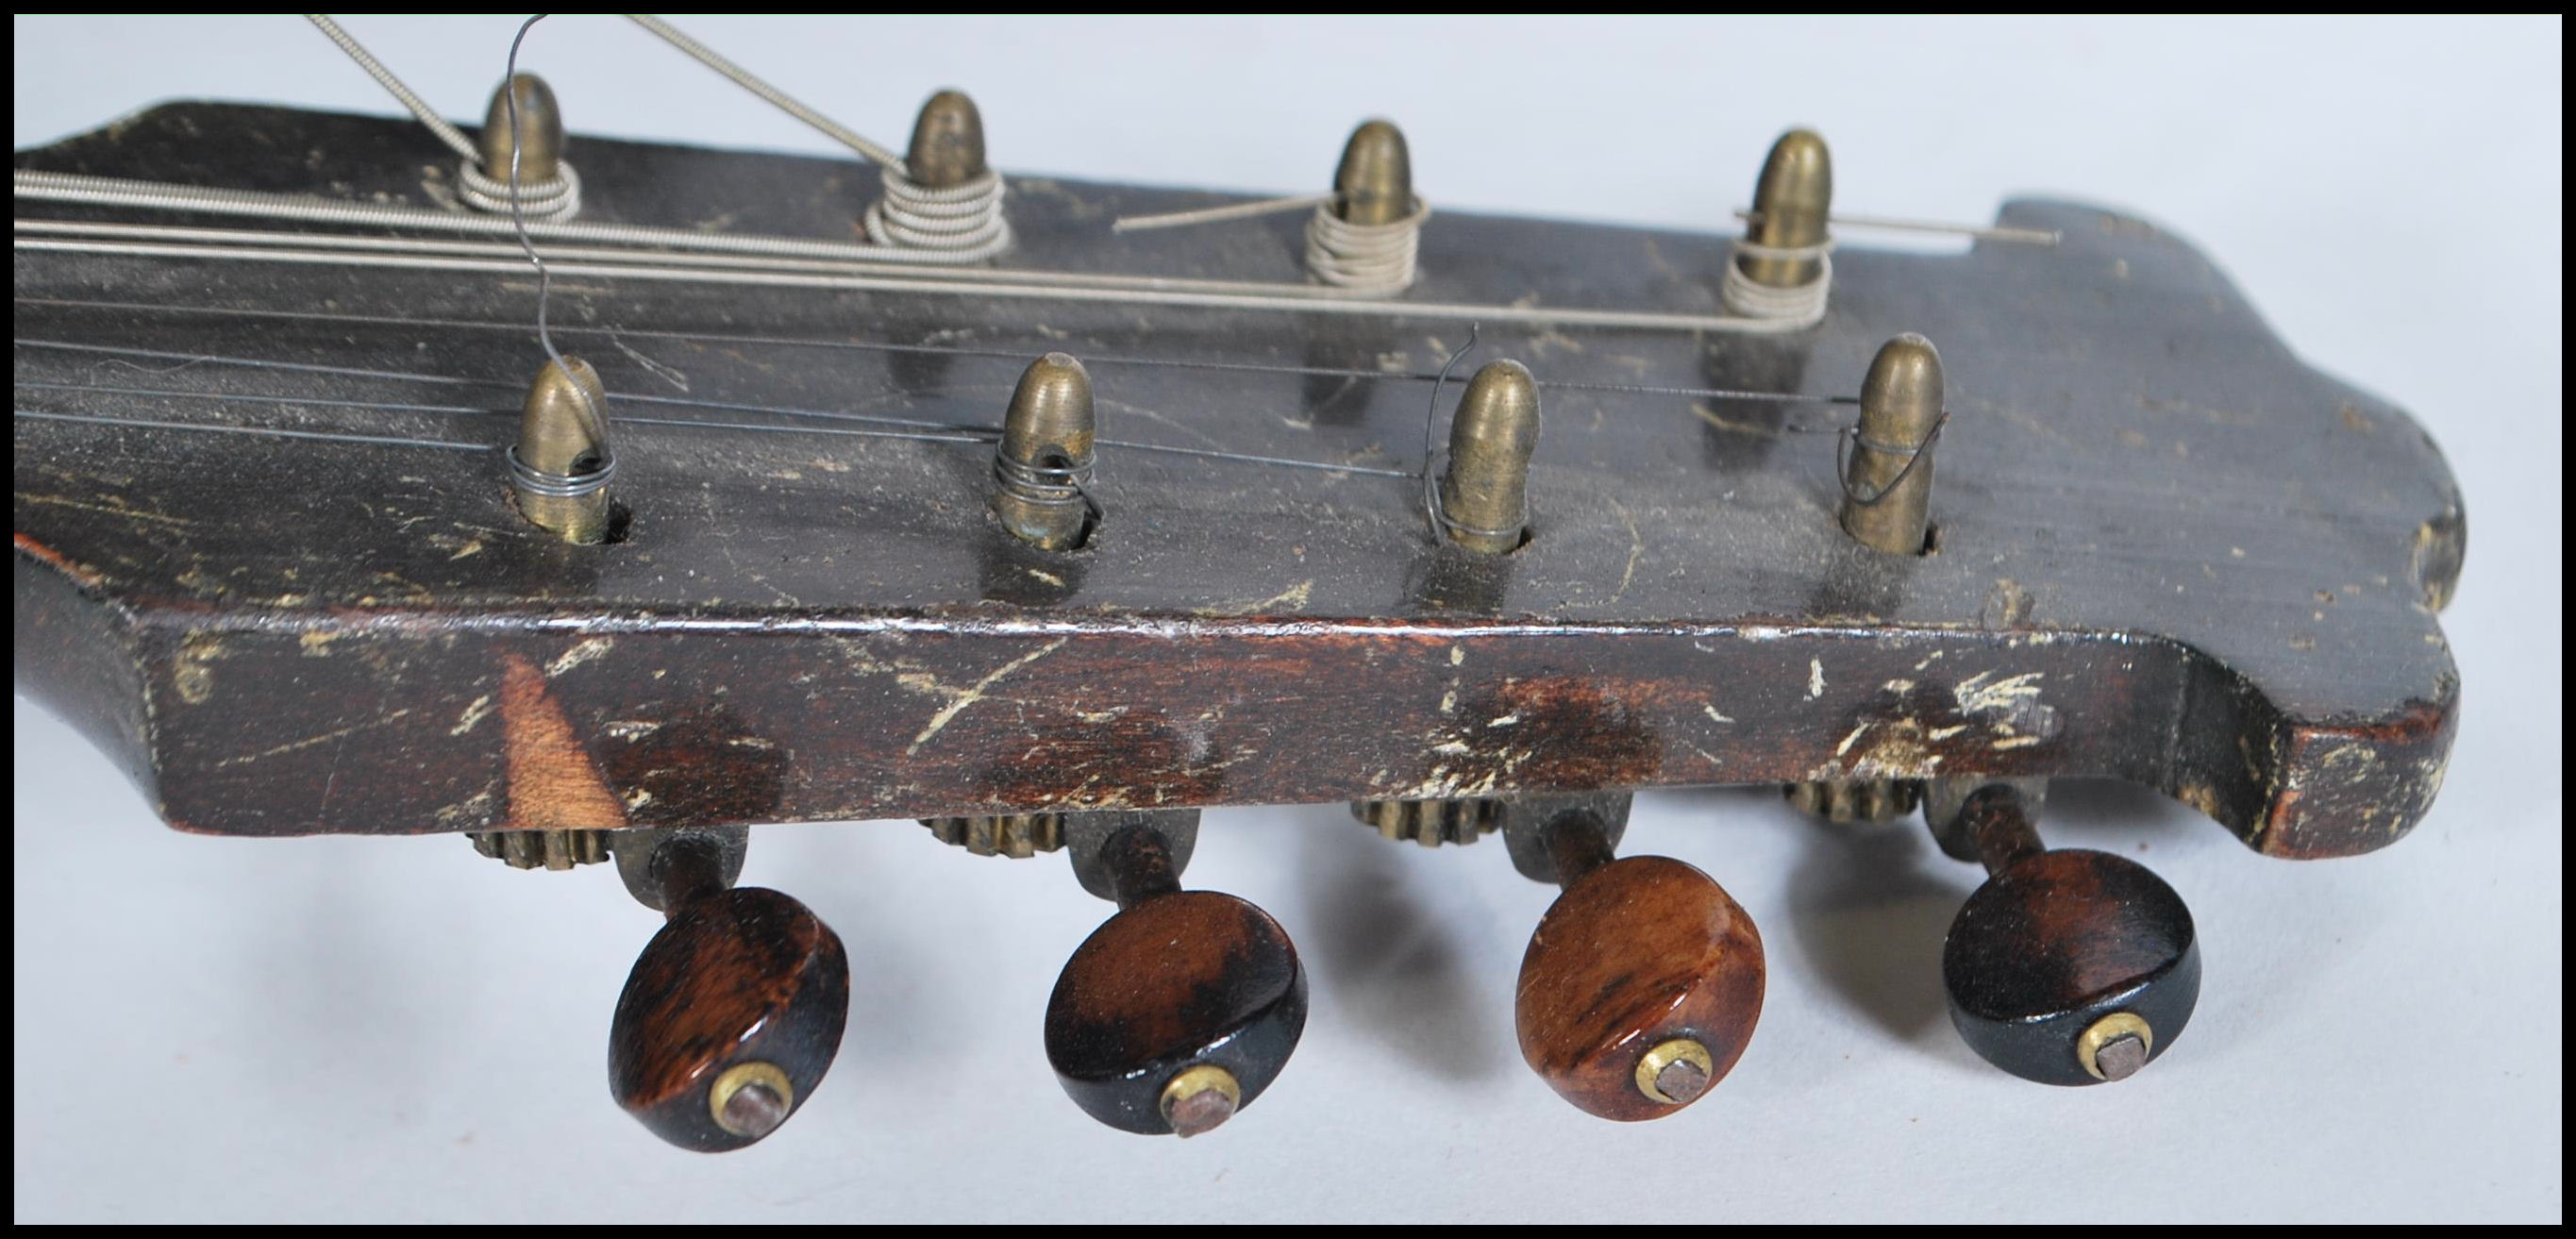 An early 20th Century Mandolin having mother of pearl inlaid fingerboard with bone and tortoiseshell - Image 3 of 7